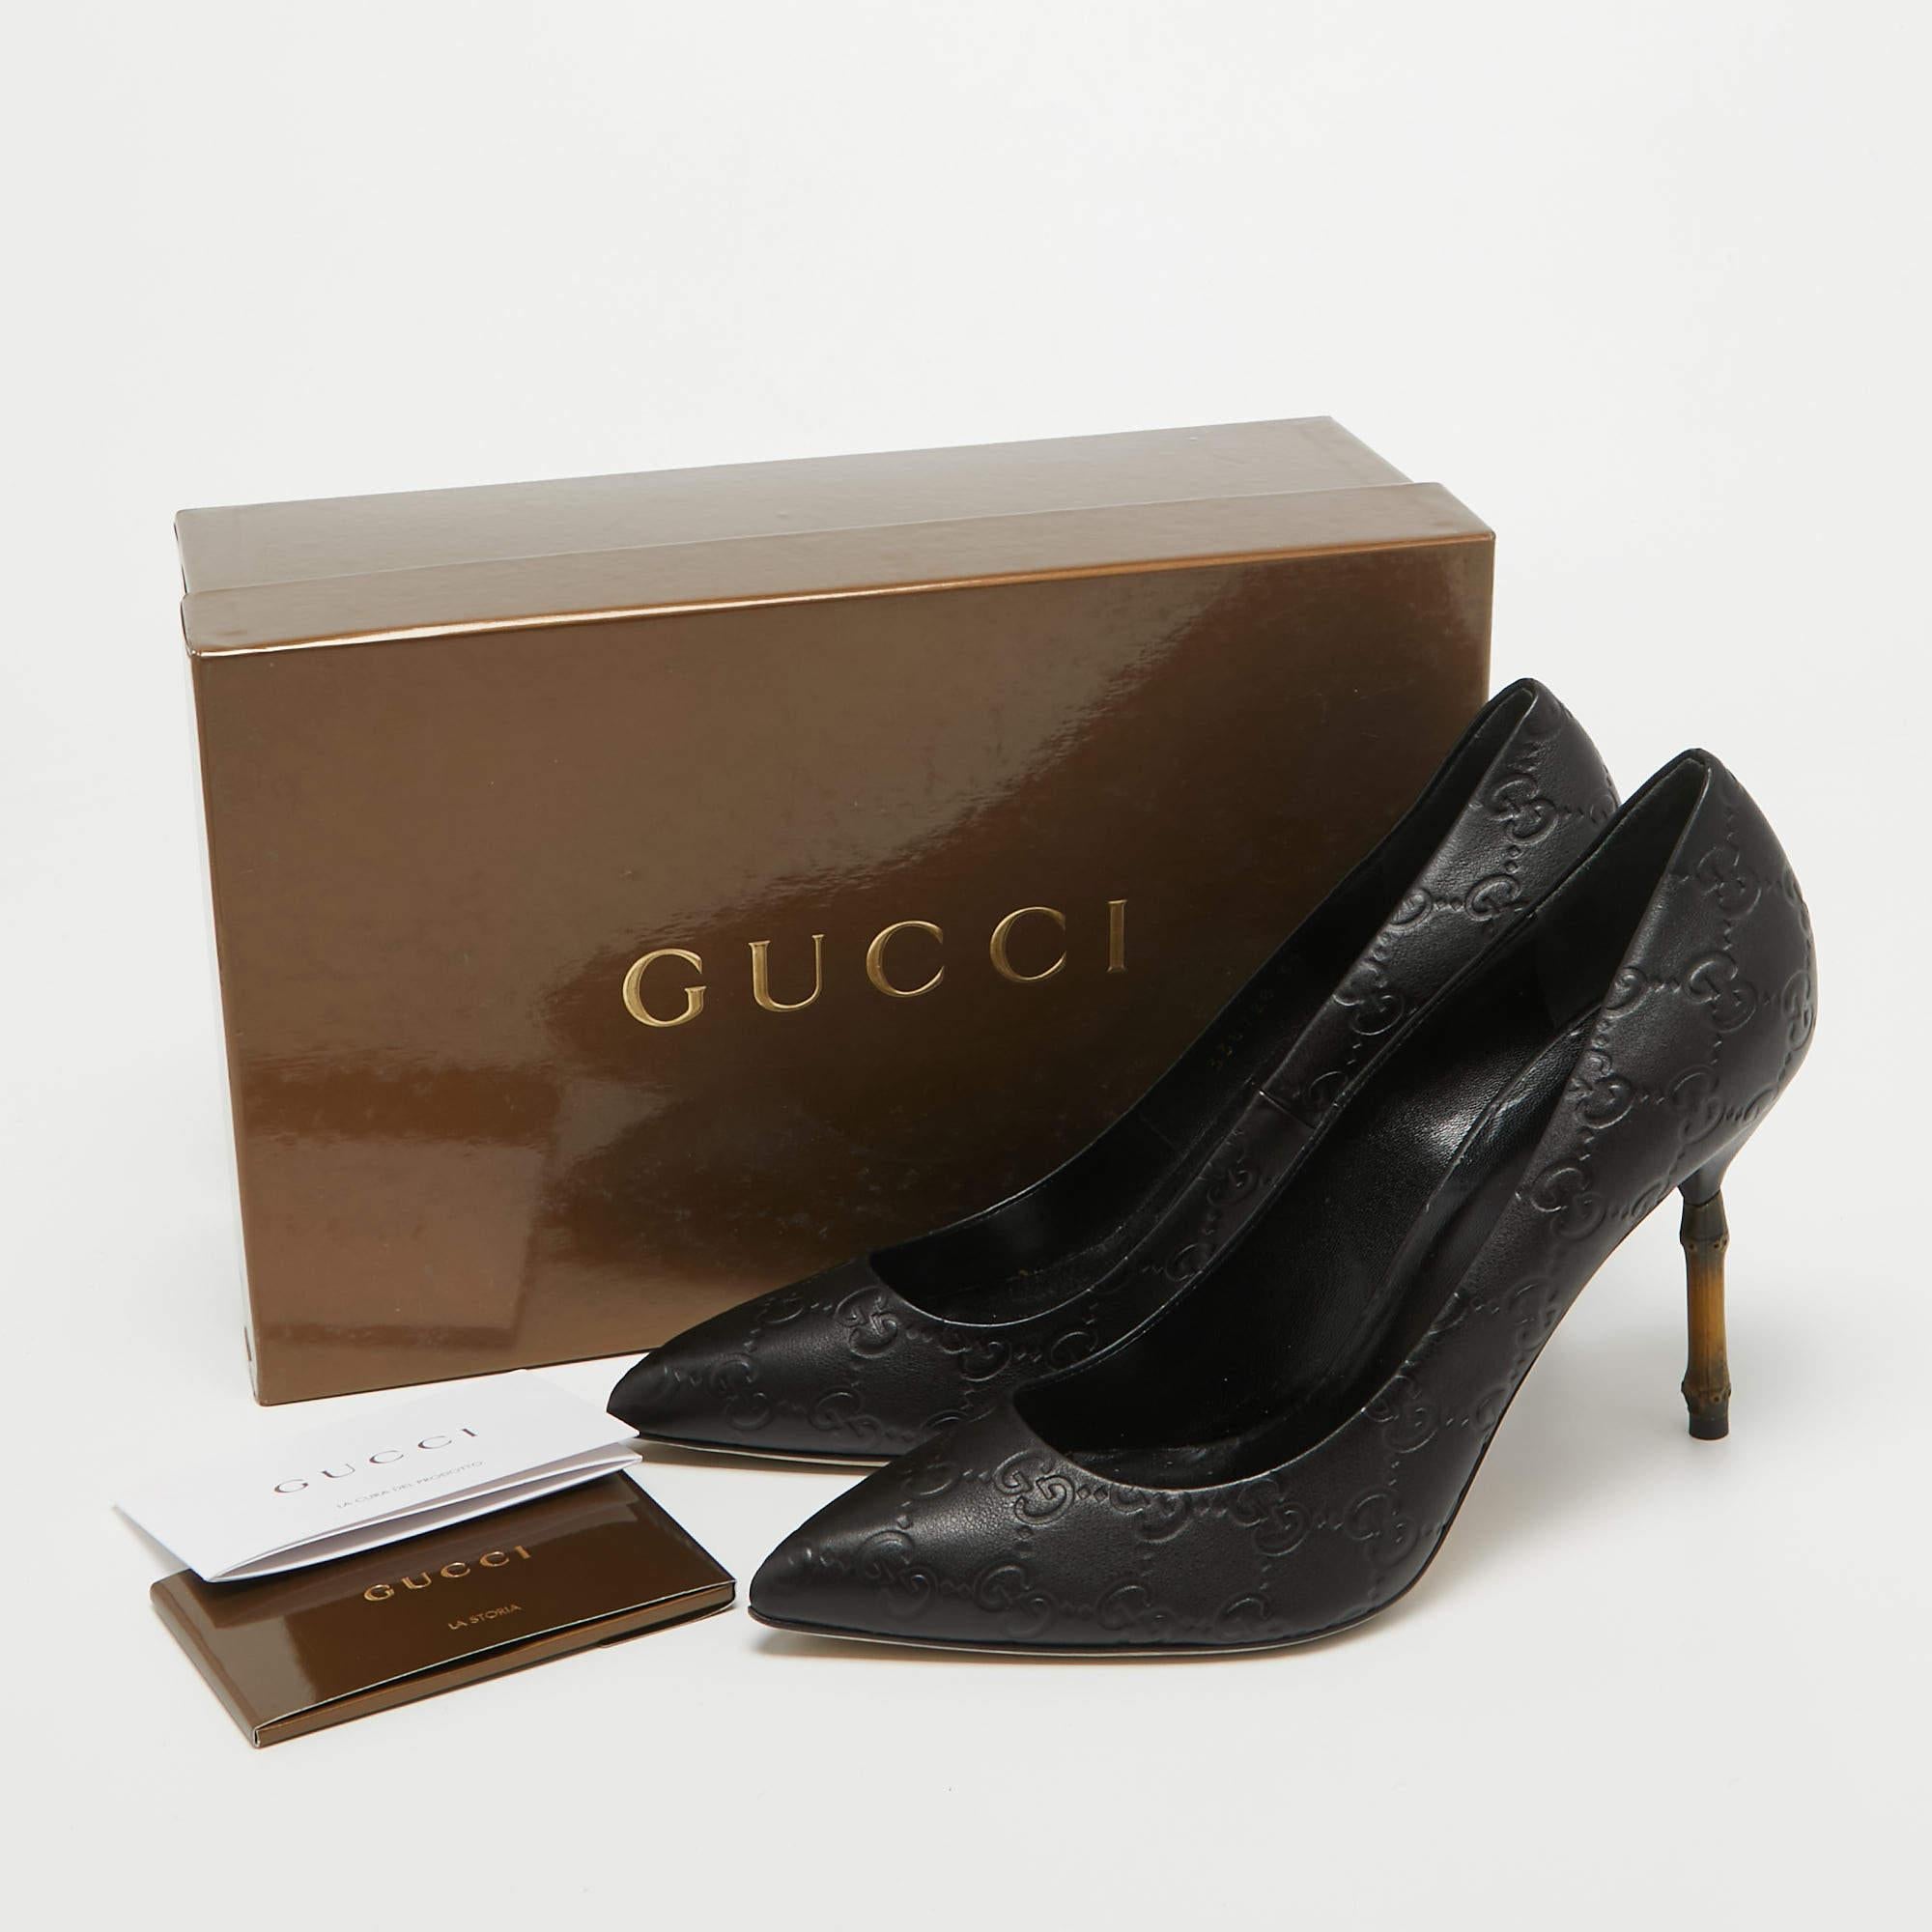 Gucci Black Guccissima Leather Kristen Bamboo Heel Pumps Size 39 For Sale 5